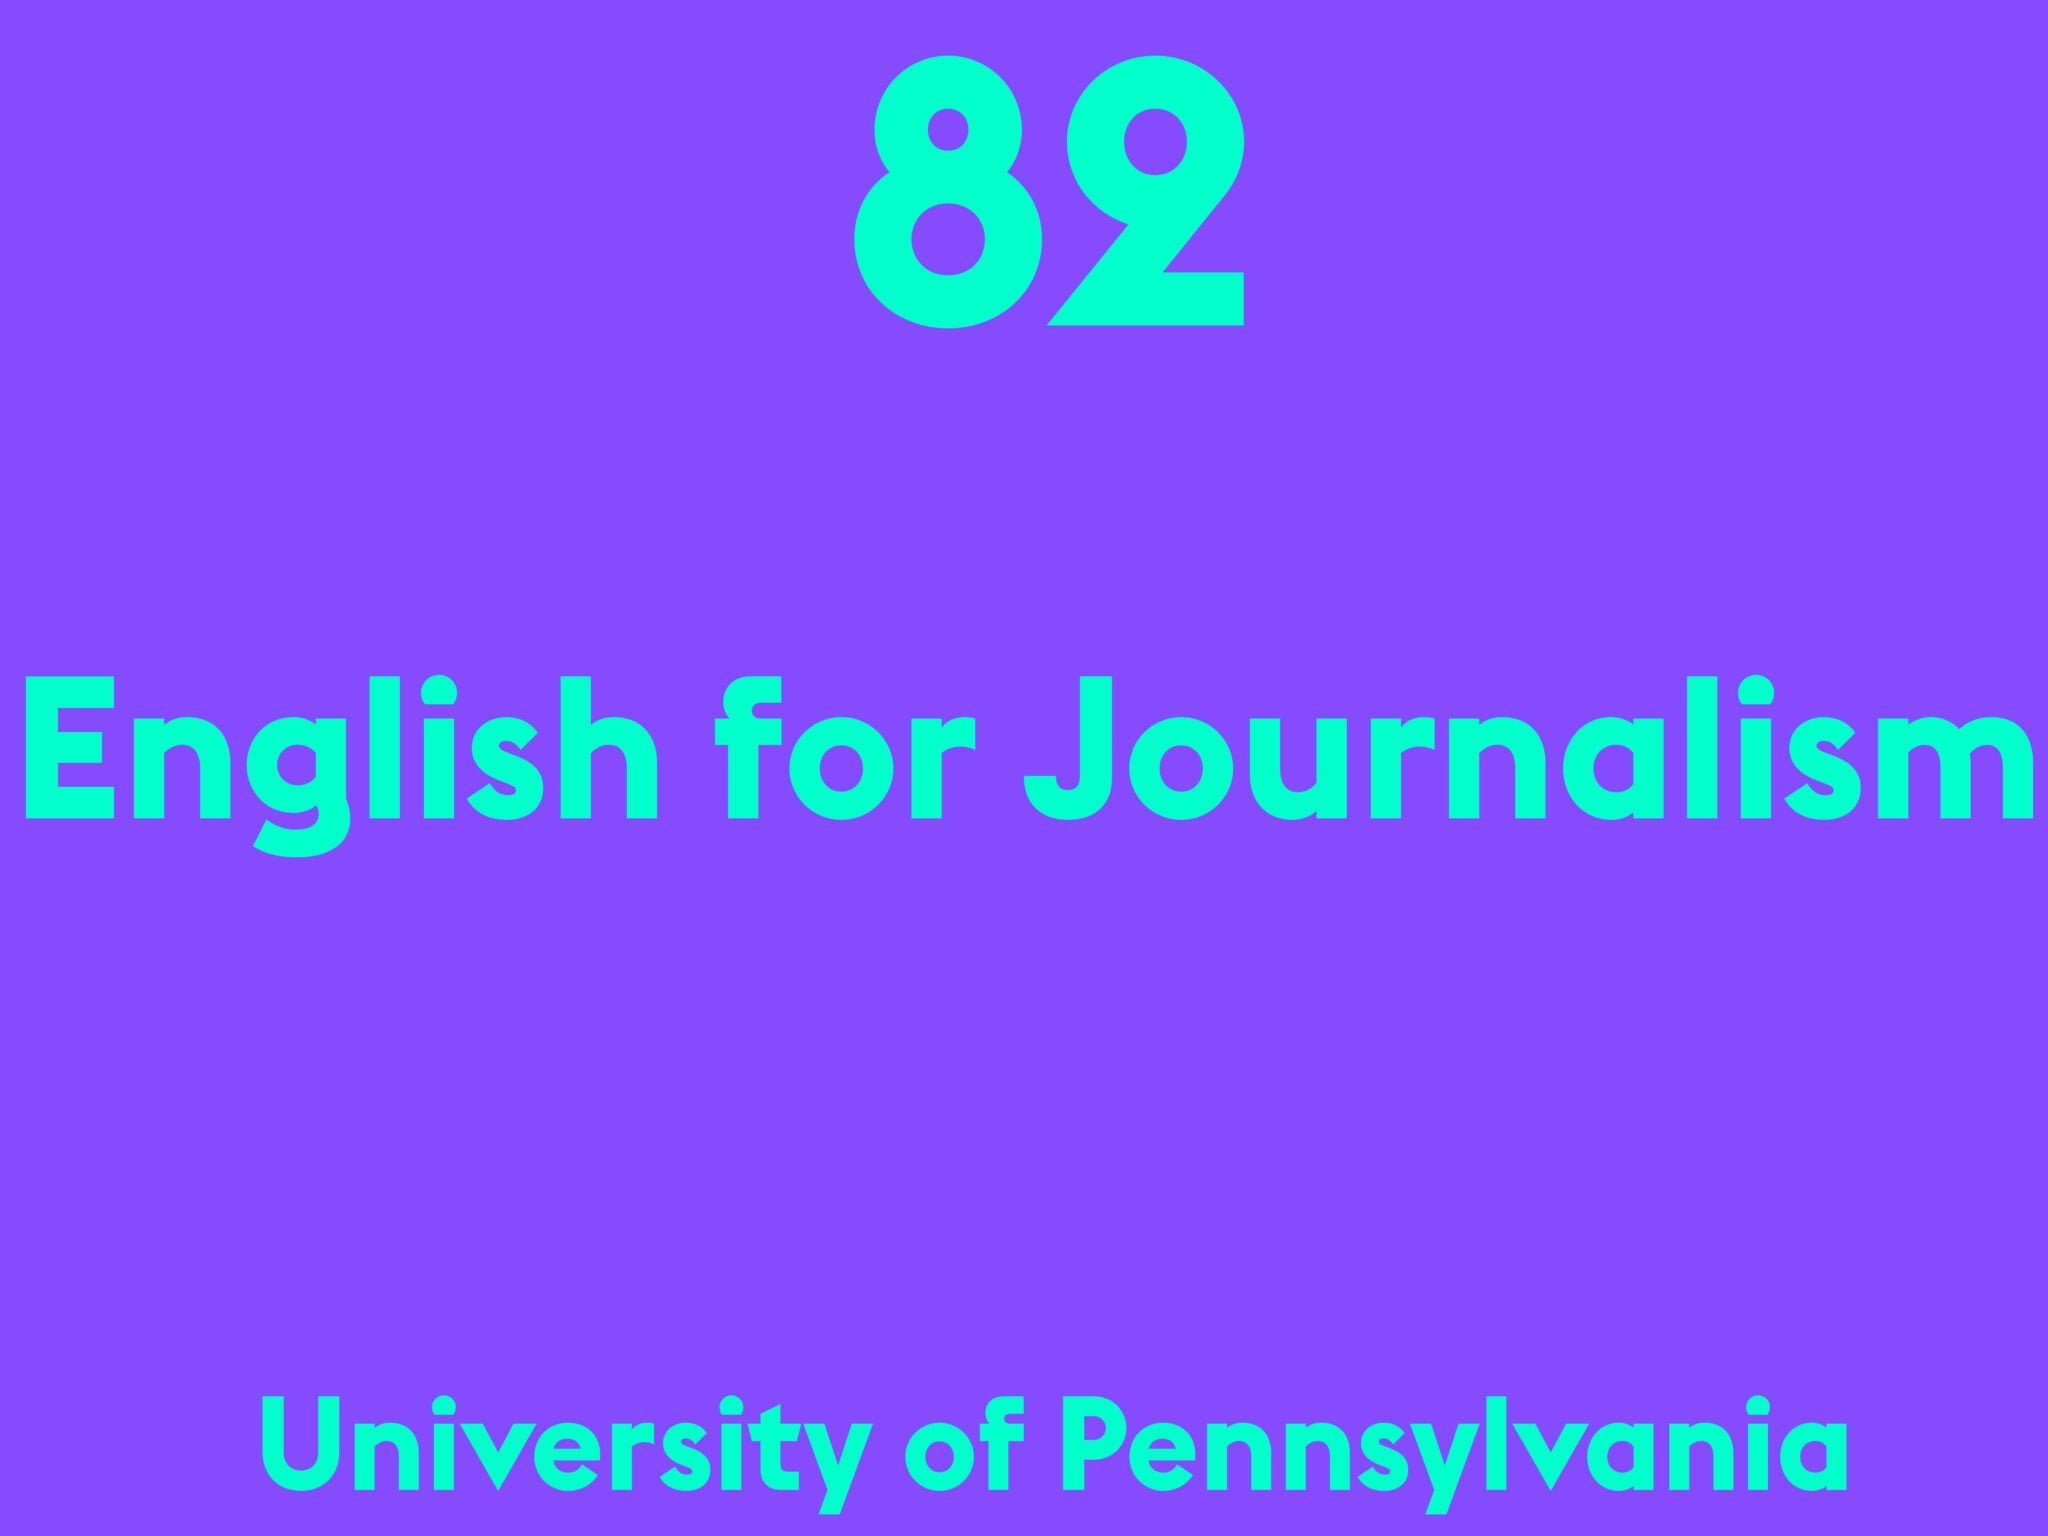 English for Journalism